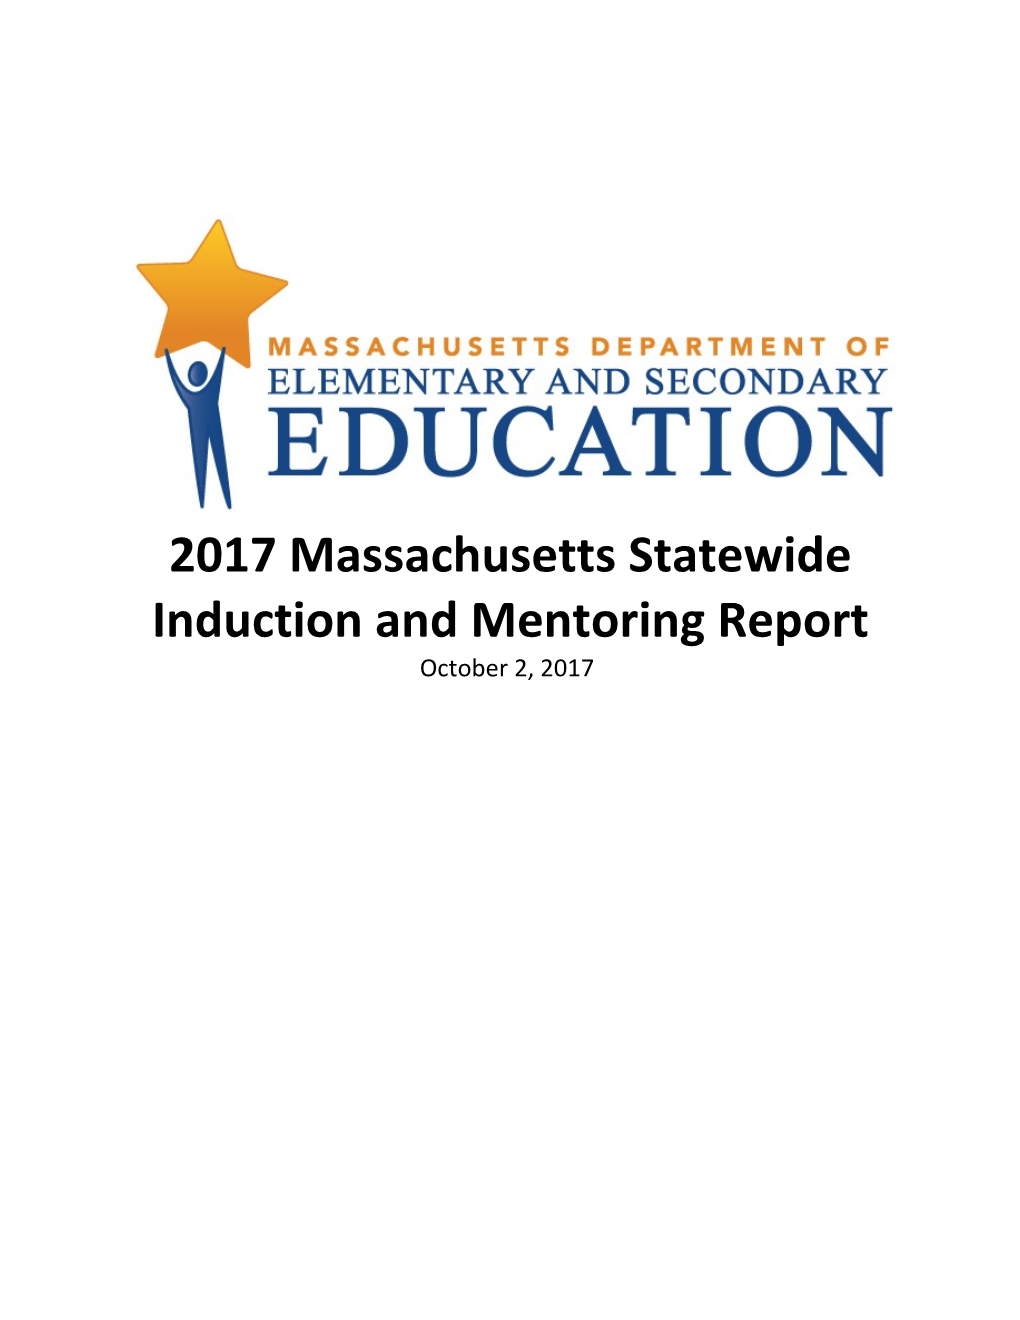 2017 Induction and Mentoring Report